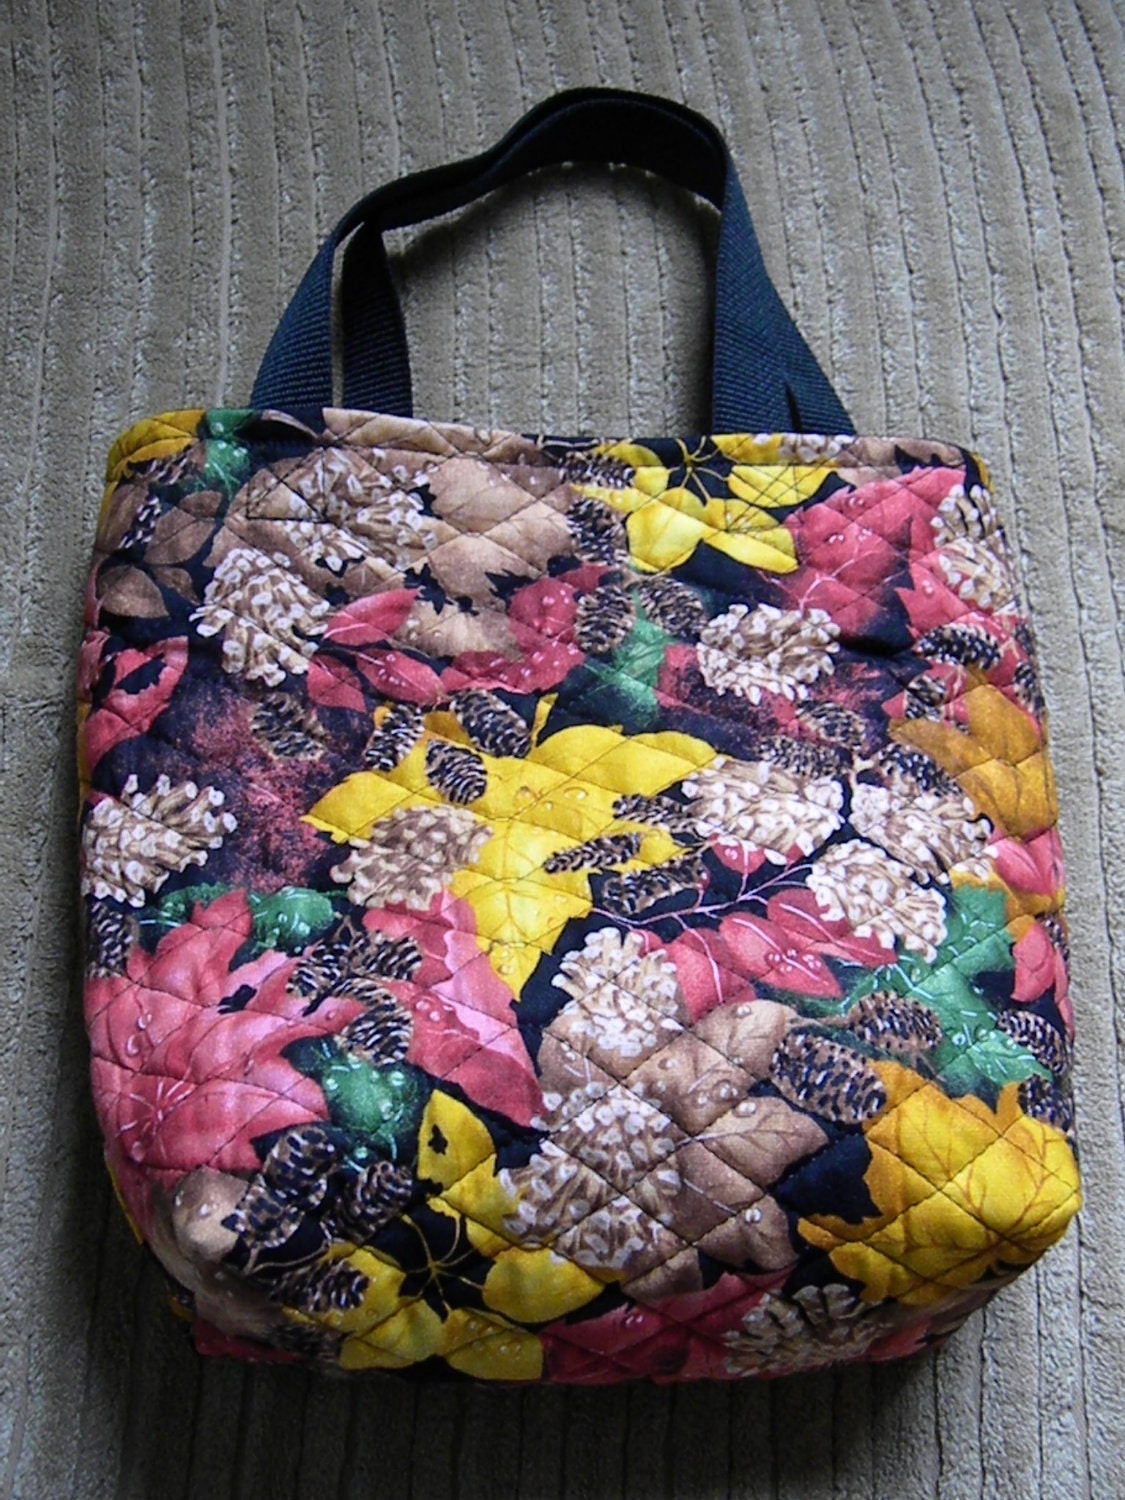 Small Autumn Leaves Tote Bag, reversible bag with strong handles